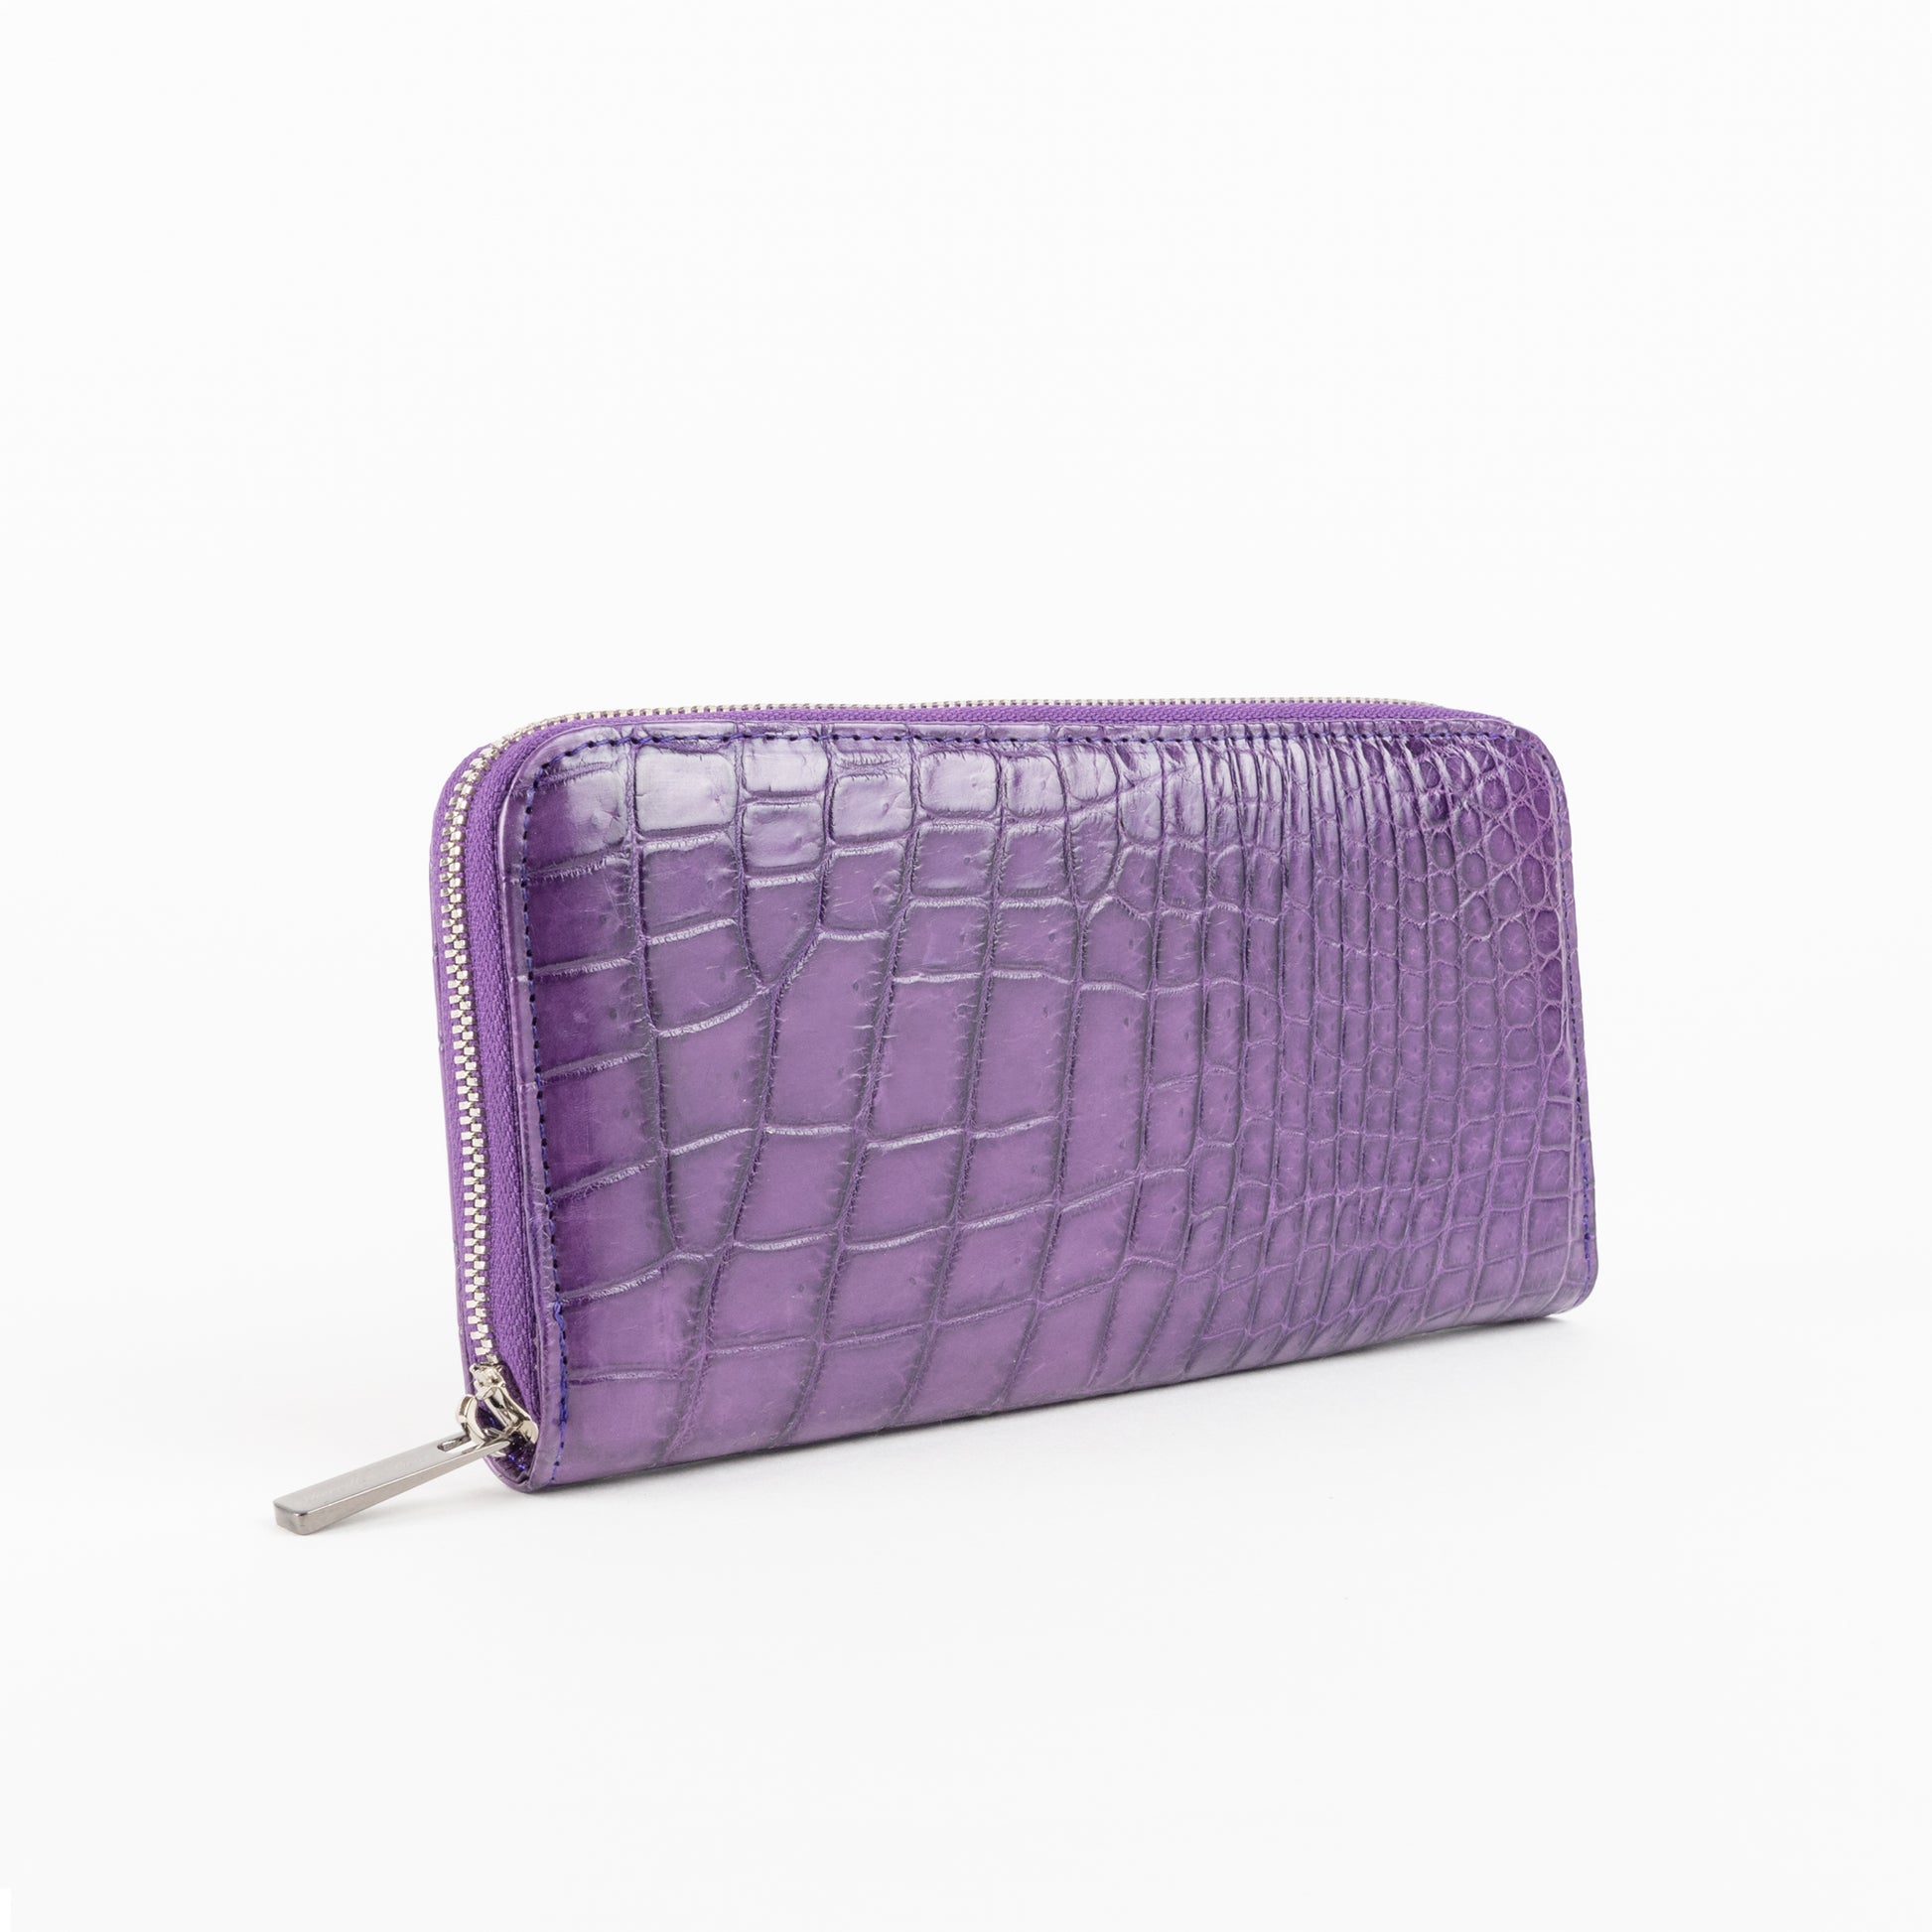 Sherrill brothers purple wallet with silver zipper 